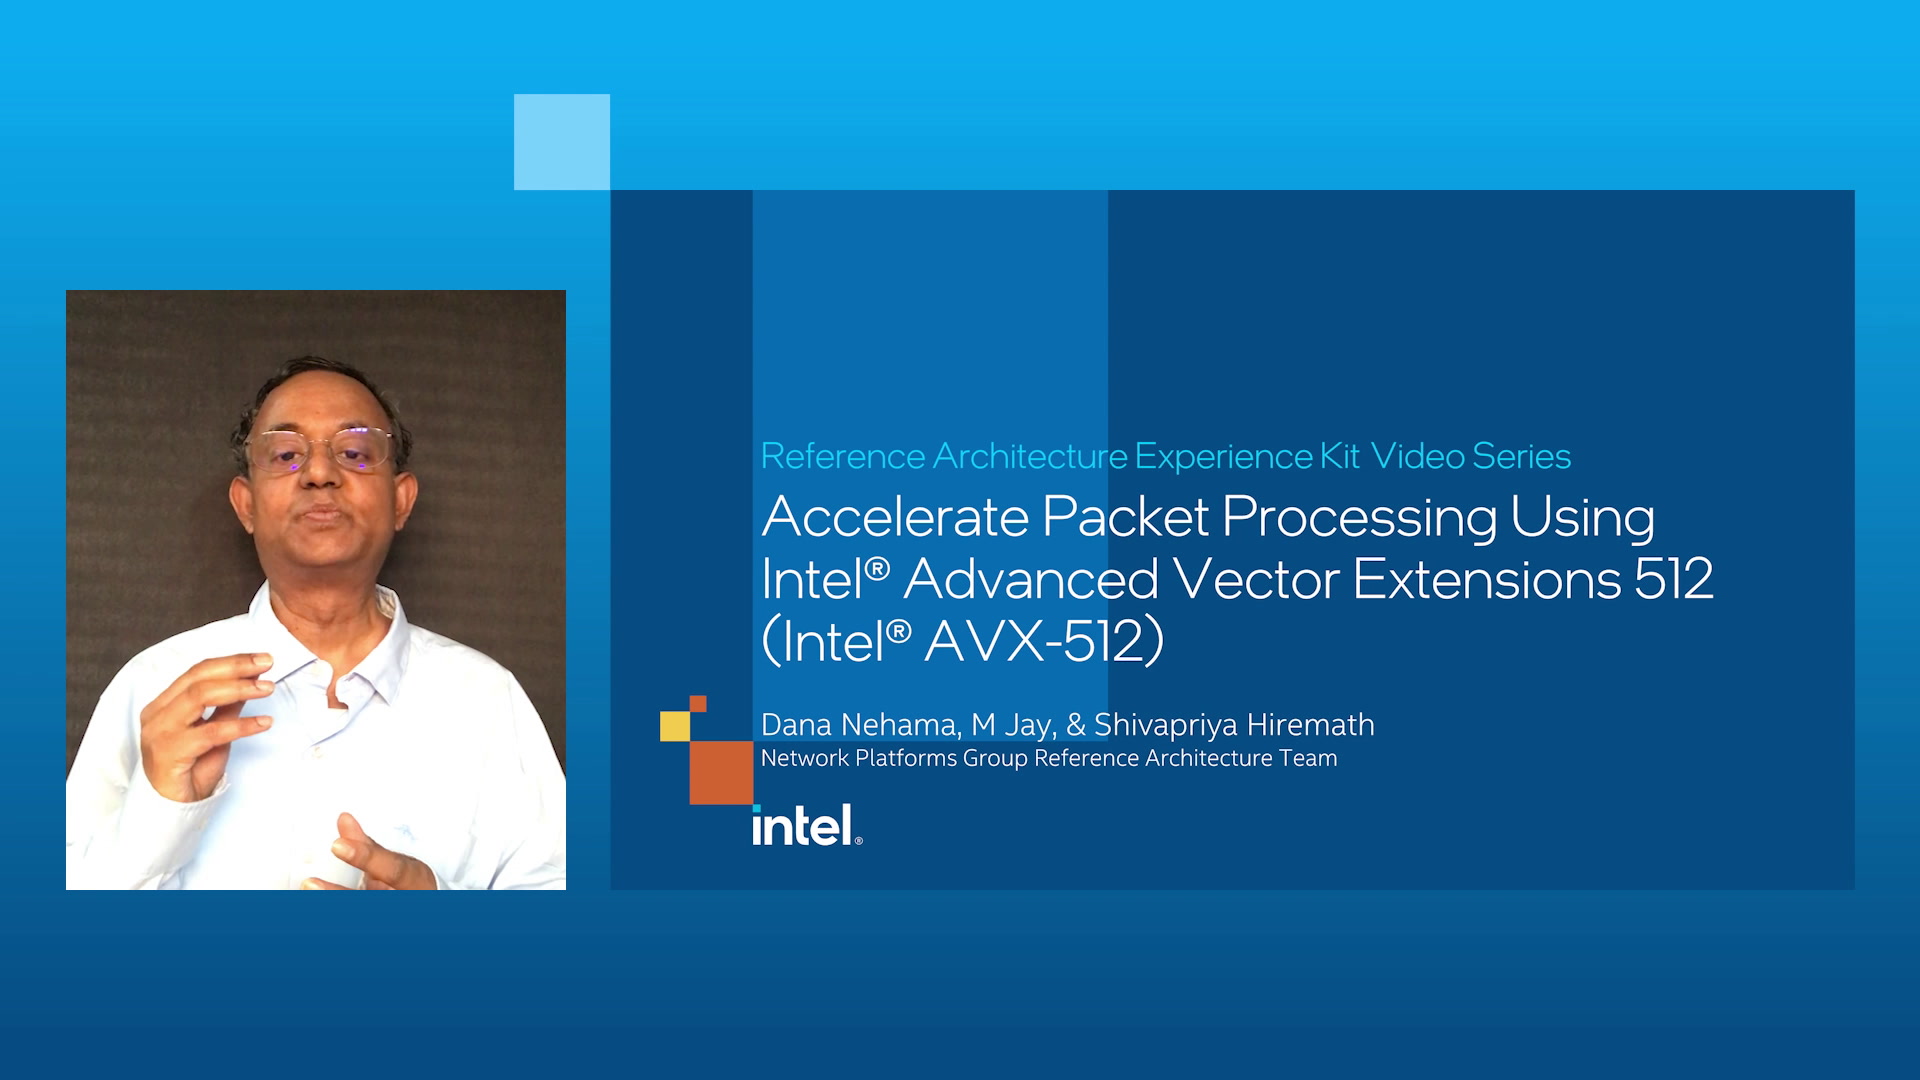 Accelerate Packet Processing Using Intel® Advanced Vector Extensions 512 (Intel® AVX-512)